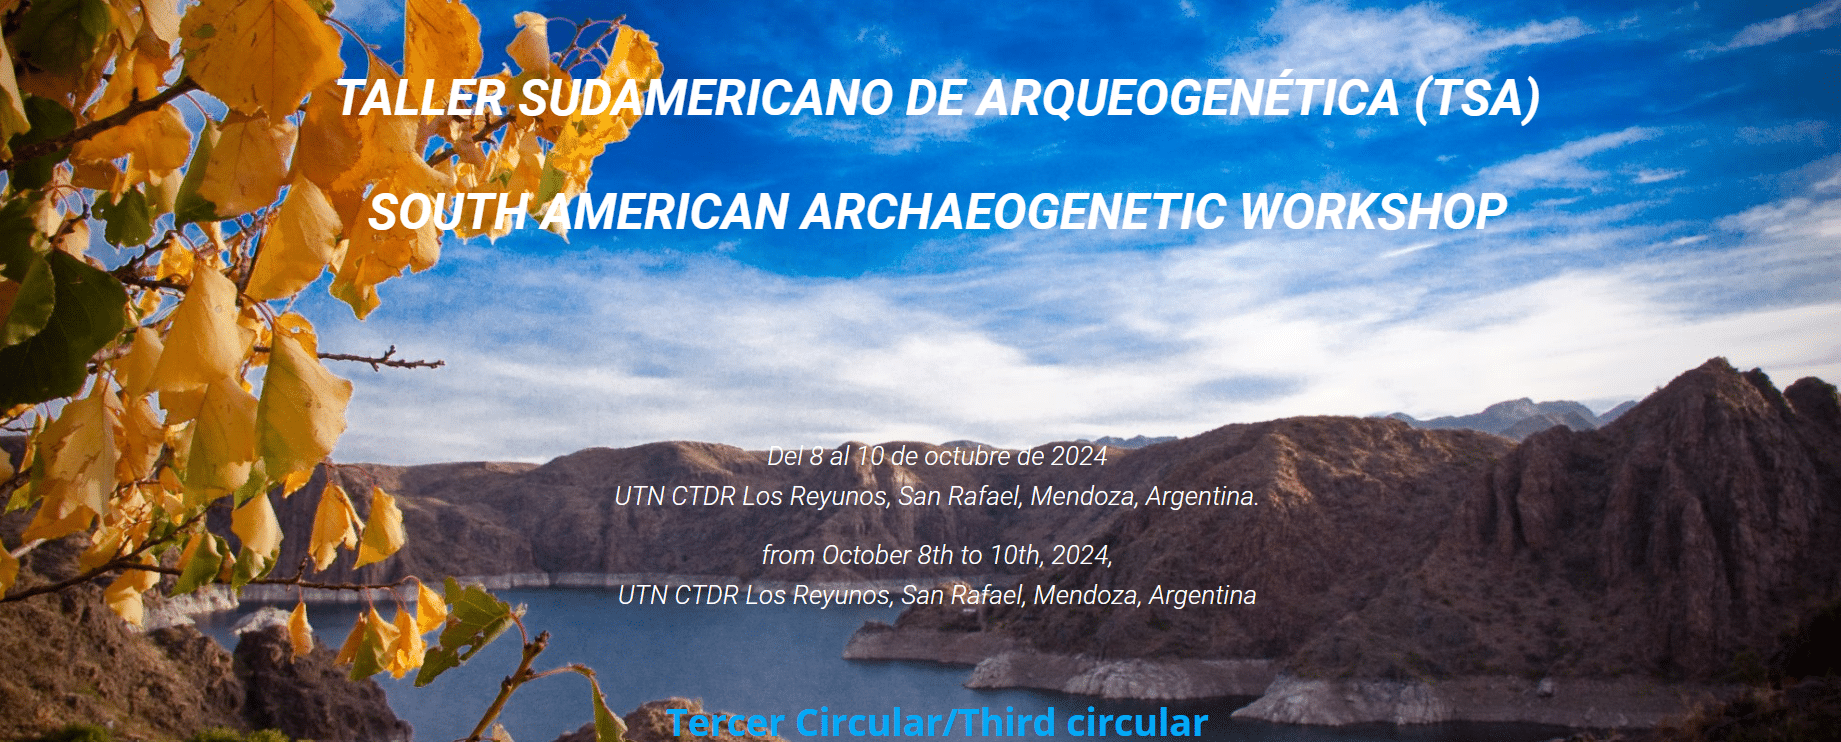 First South American Archaeogenetic Workshop